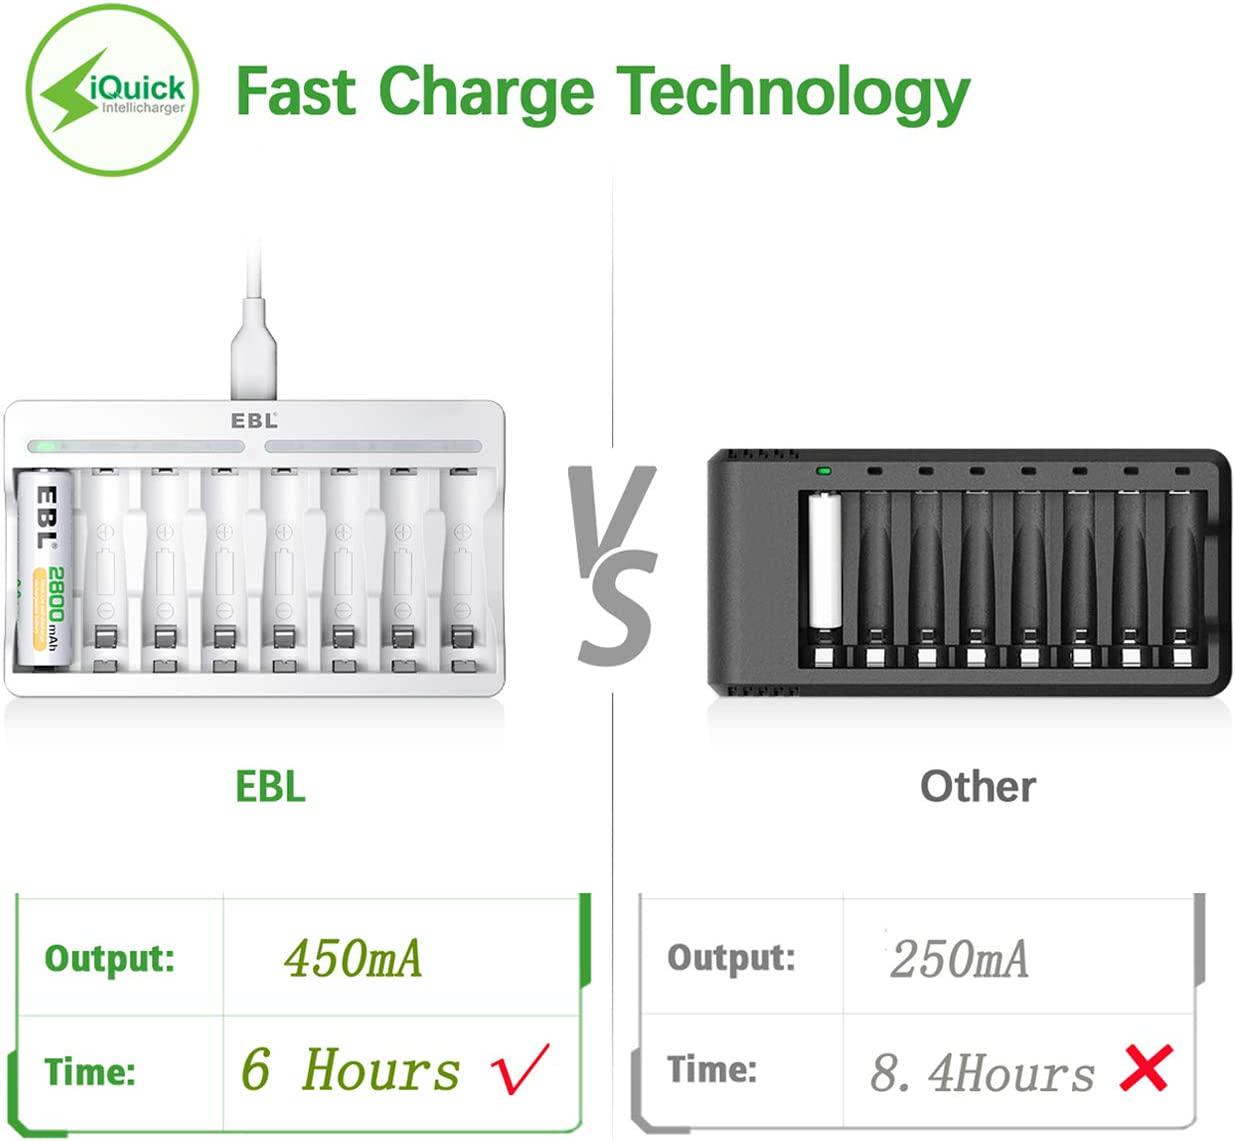 EBL, EBL 9010 AA AAA Battery Charger - Independent 8 Bay Charger with High Charging Speed for 1.2V Ni-MH Ni-CD Rechargeable Batteries USB Cable Provided